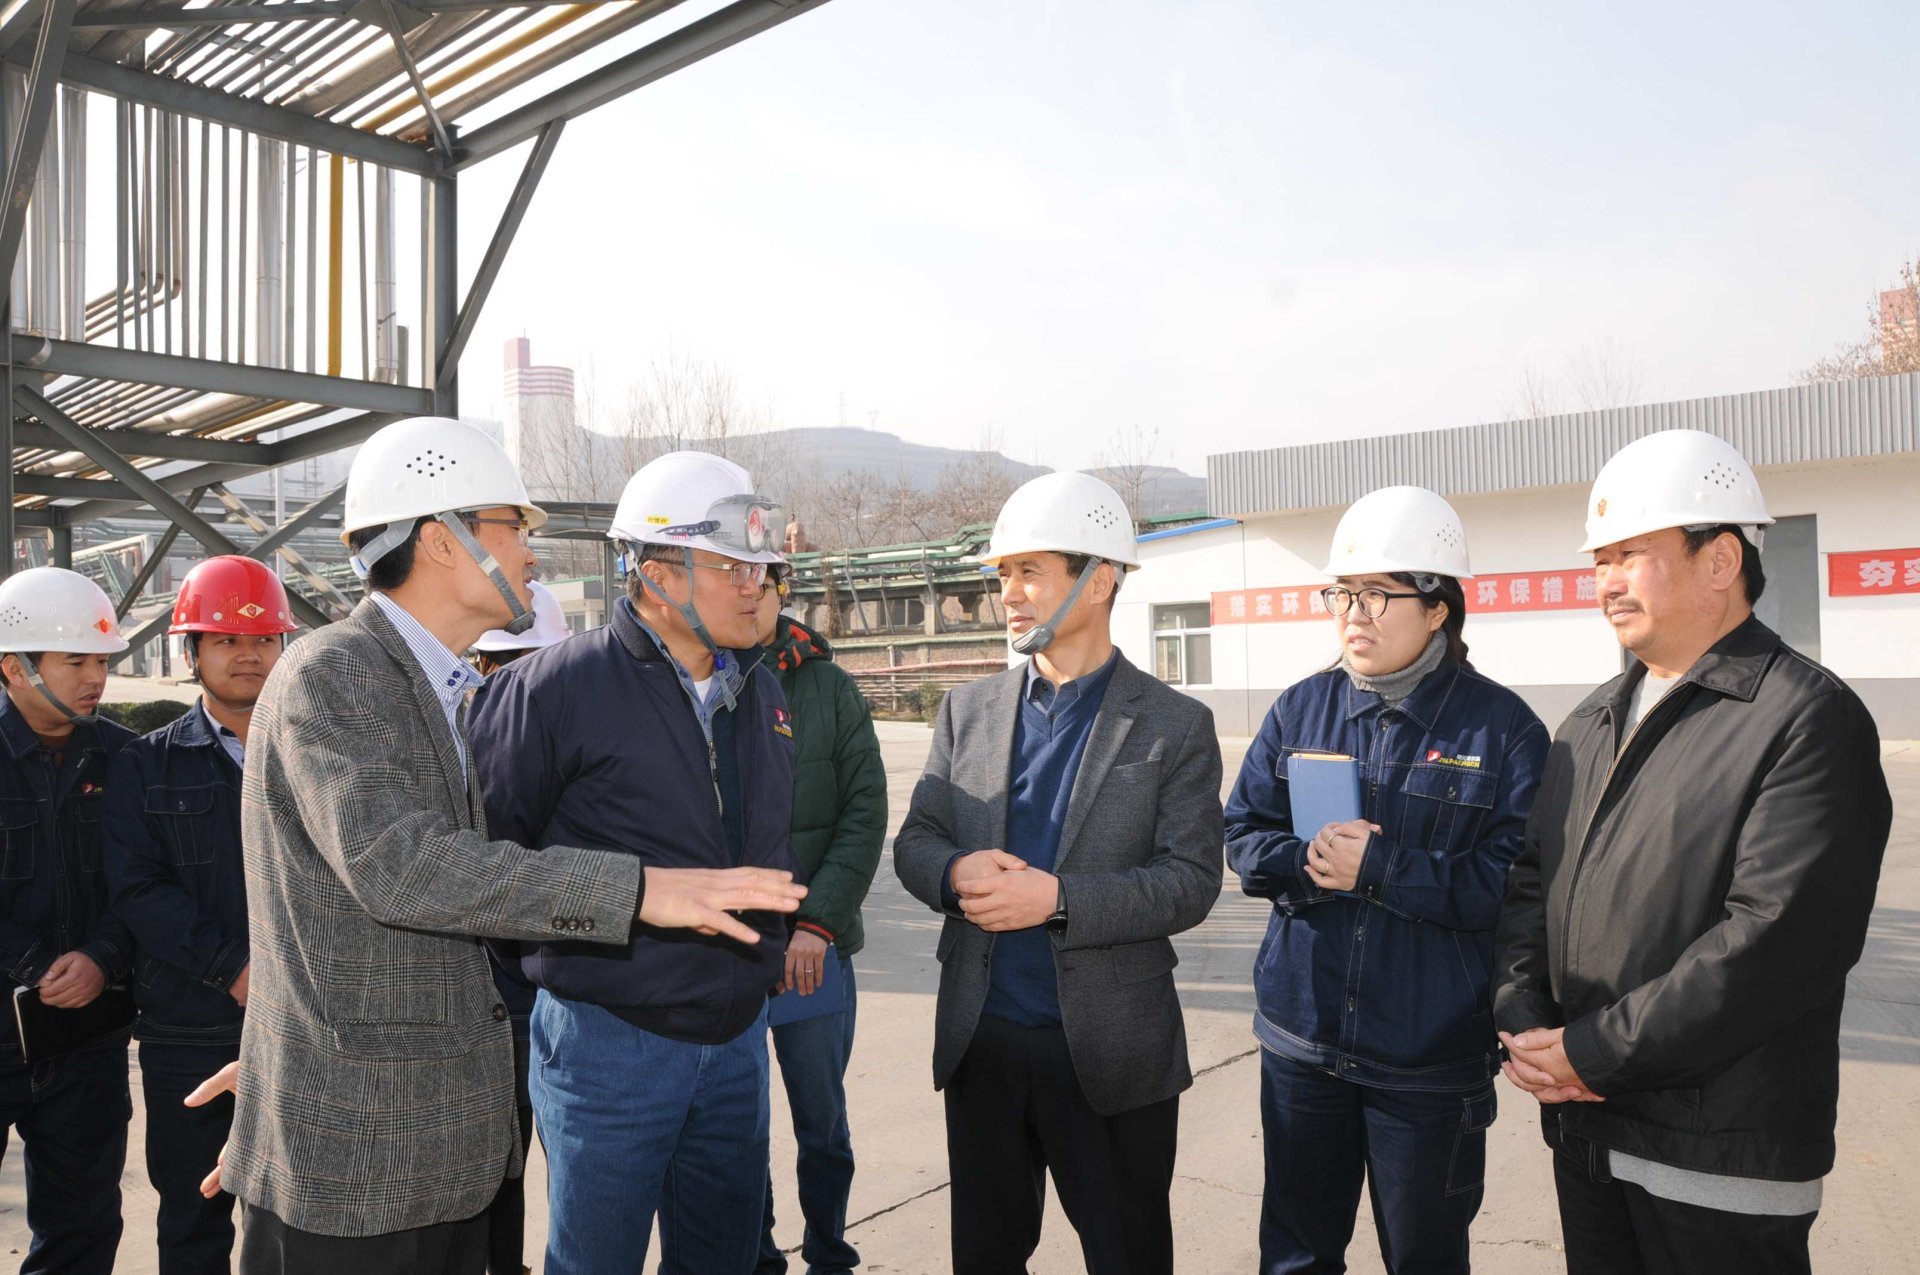 Liu Yangzhi, General Manager of Samsung Huanxin, visited our company